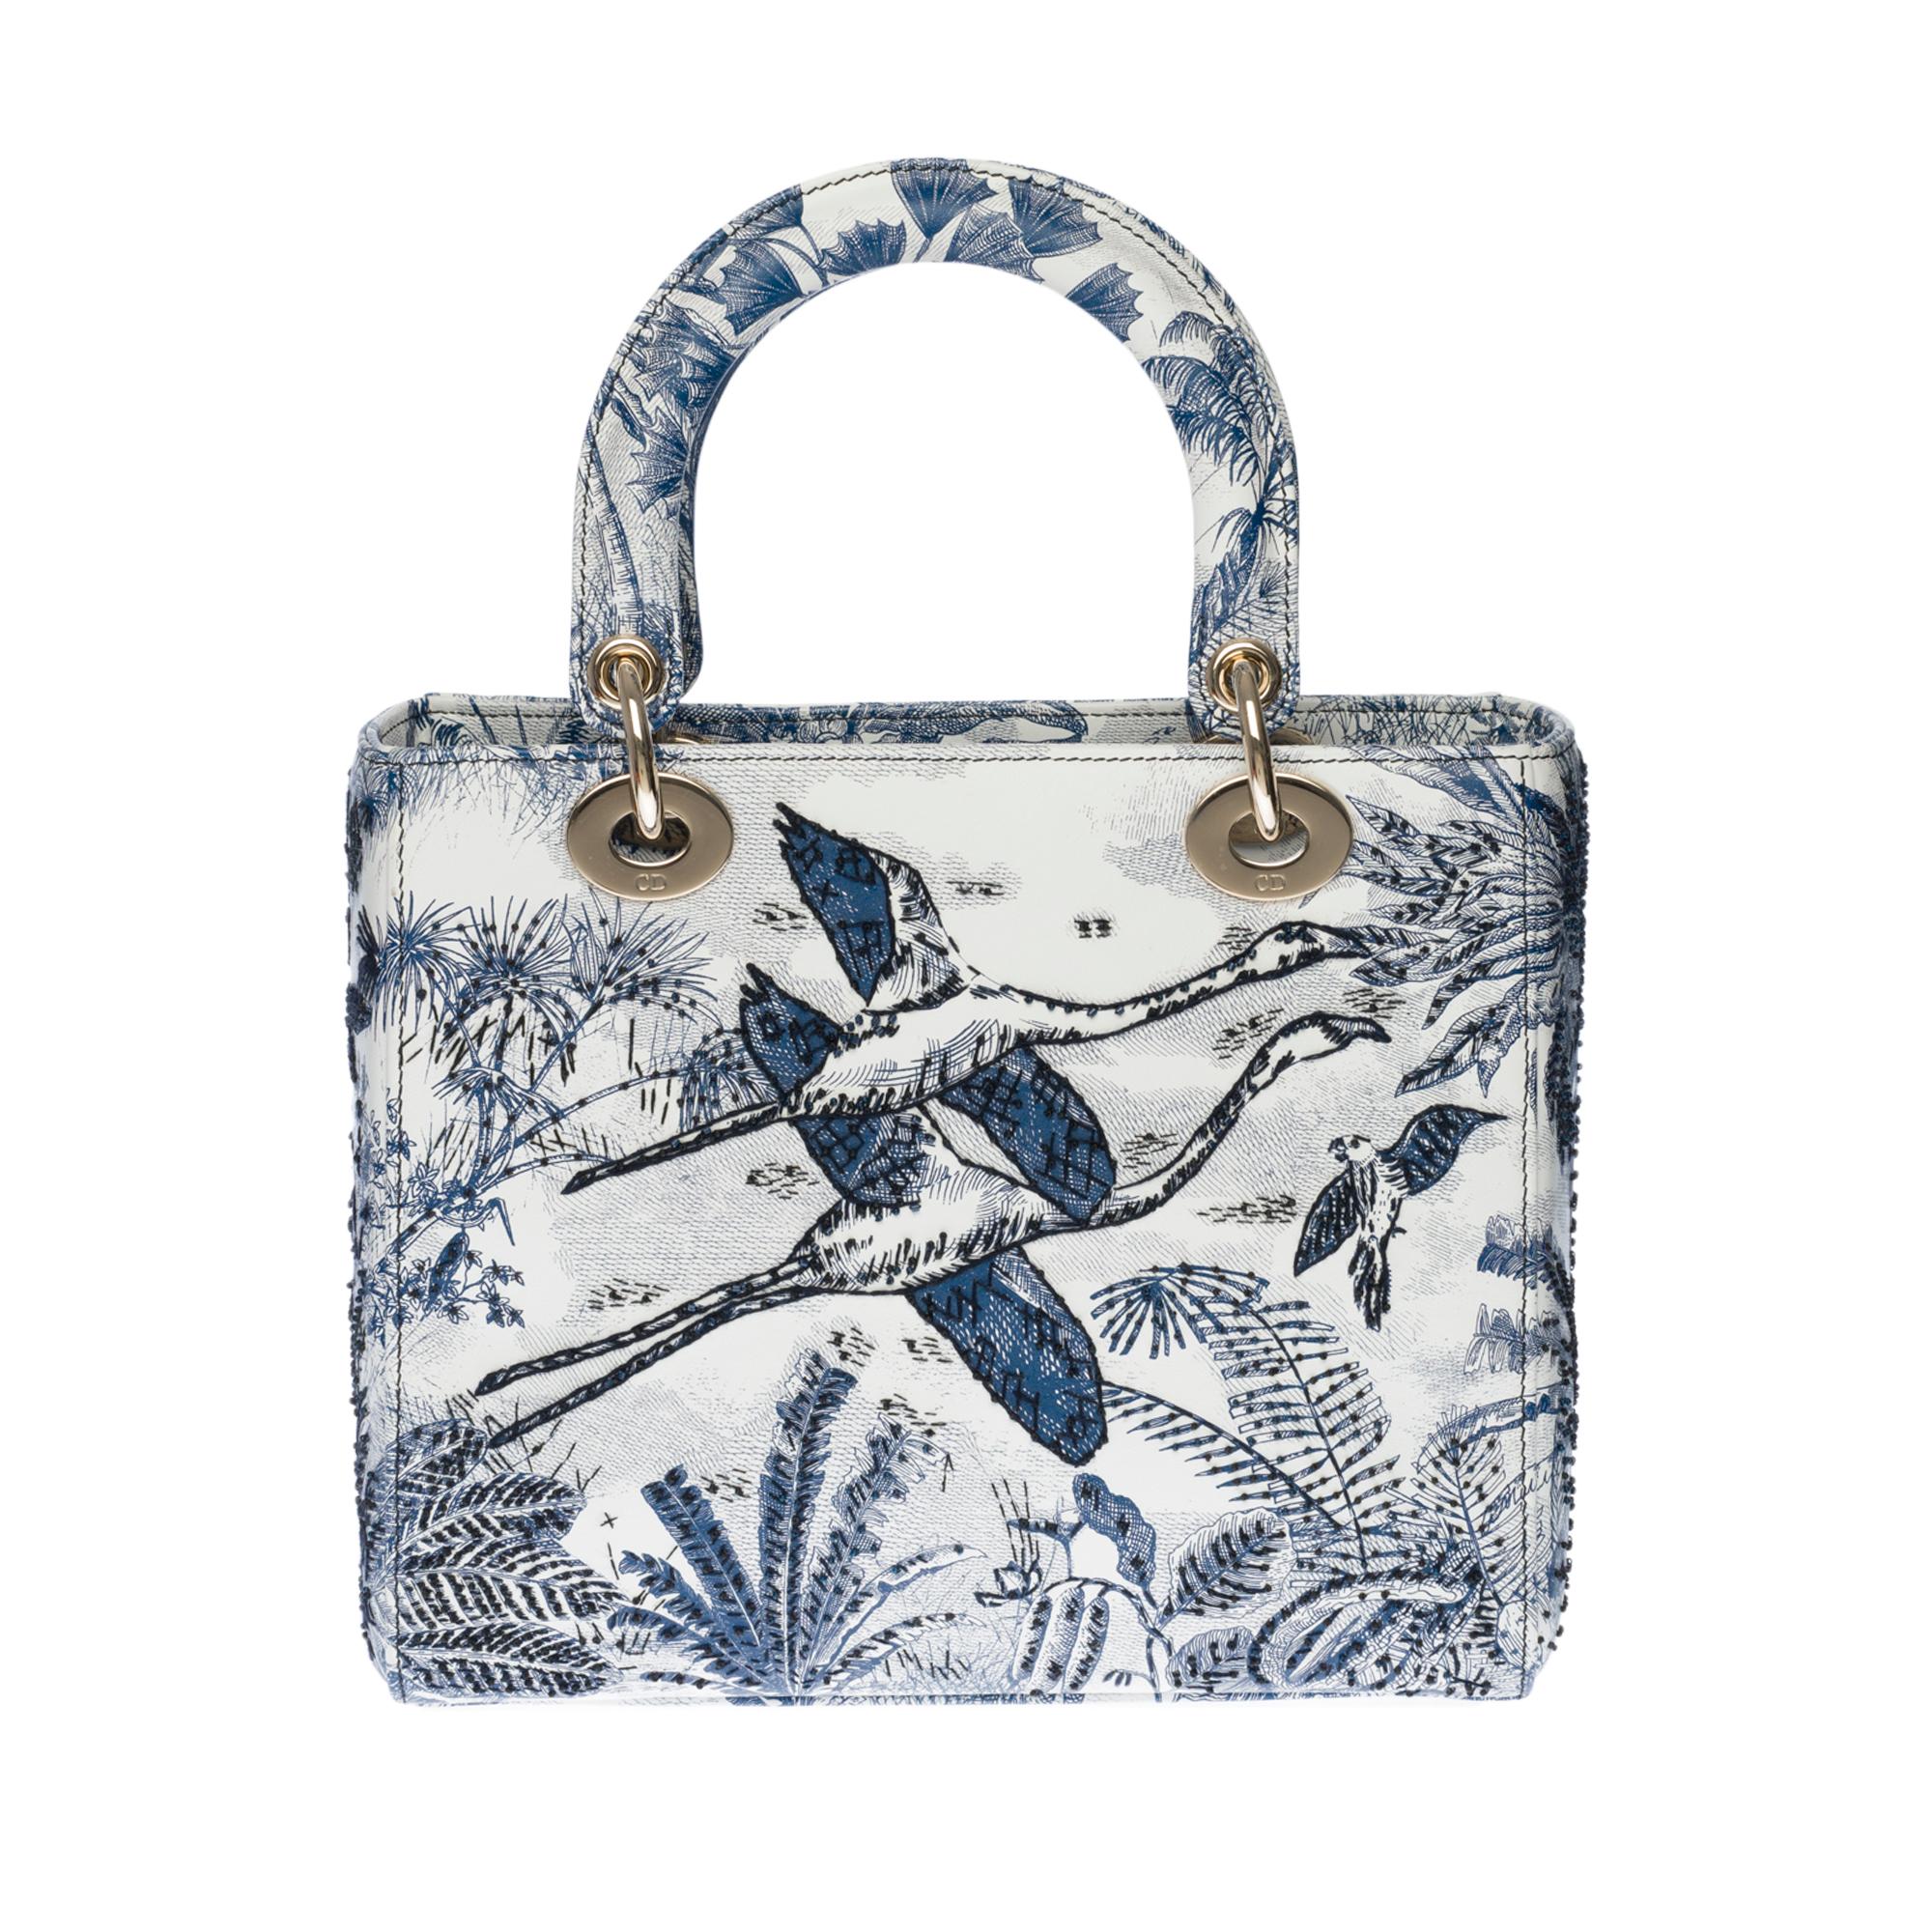 The Lady Dior bag embodies classic elegance combined with the modernity of the House of Dior. This creation is entirely embroidered with the blue and white Toile de Jouy motif, featuring the Maison’s iconic motif through a play of inverted colors.